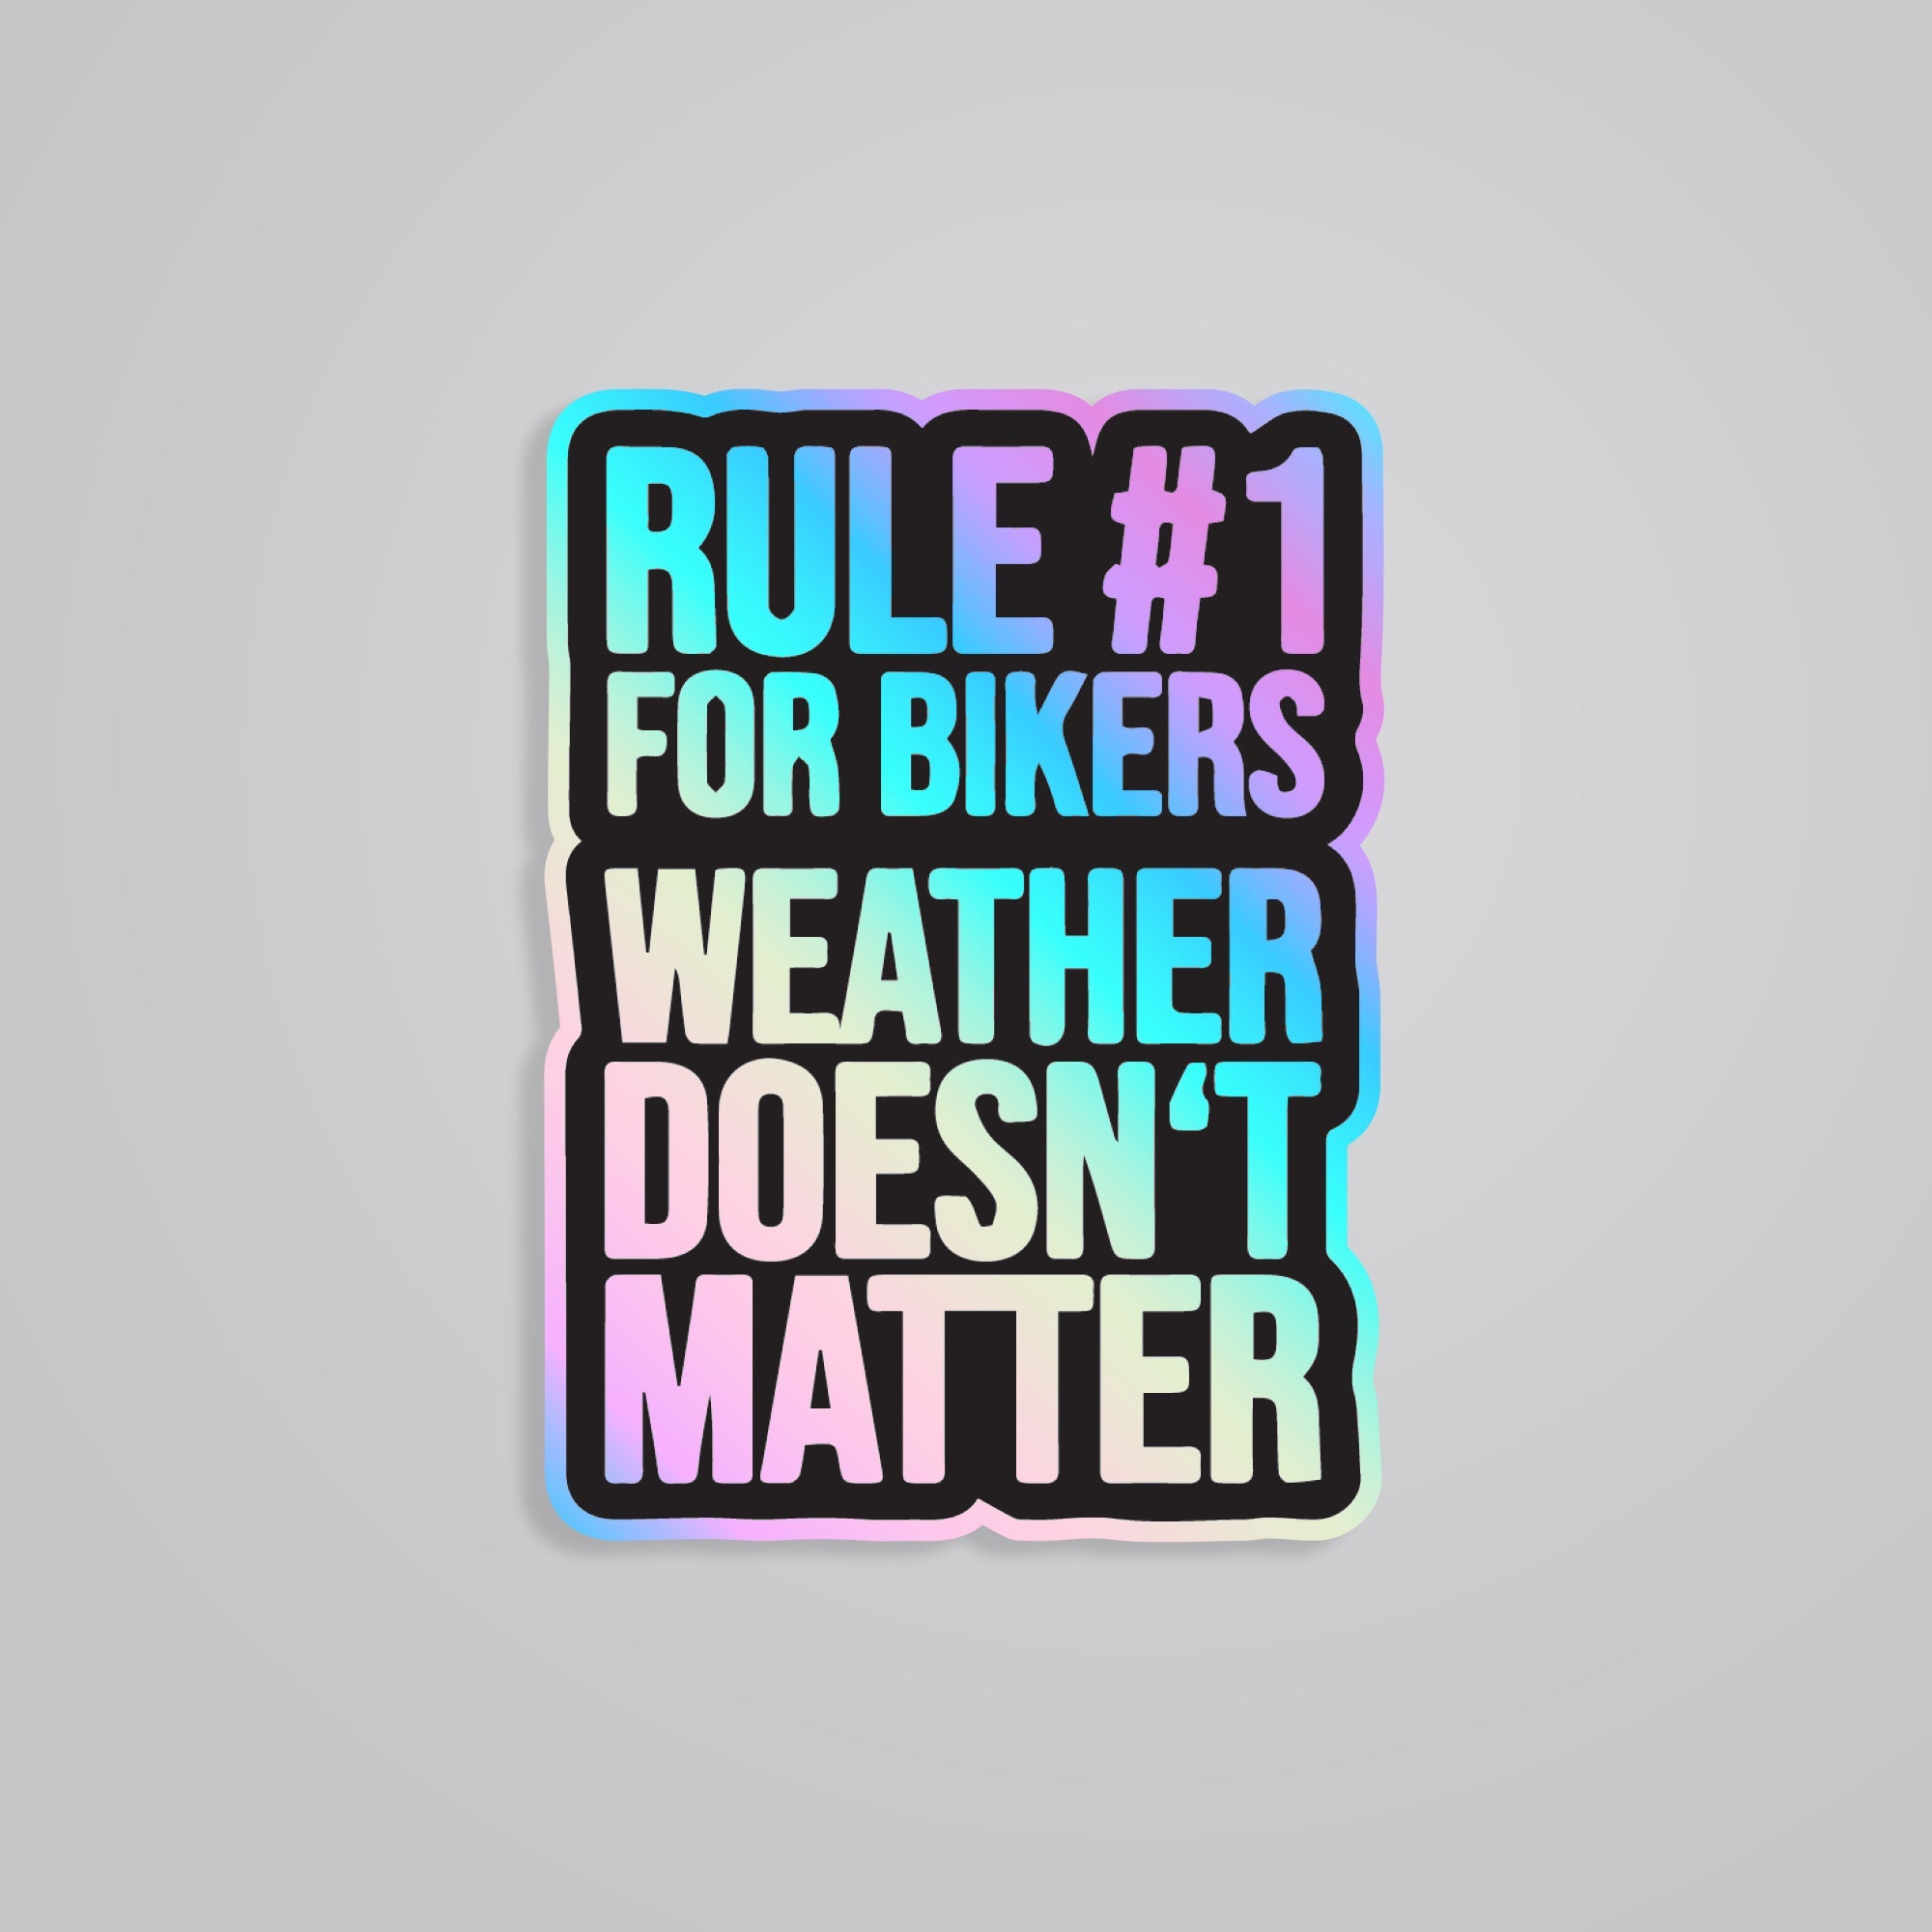 Fomo Store Holographic Stickers Cars & Bikes Rule 1 for Bikers, Weather Doesn’t Matter